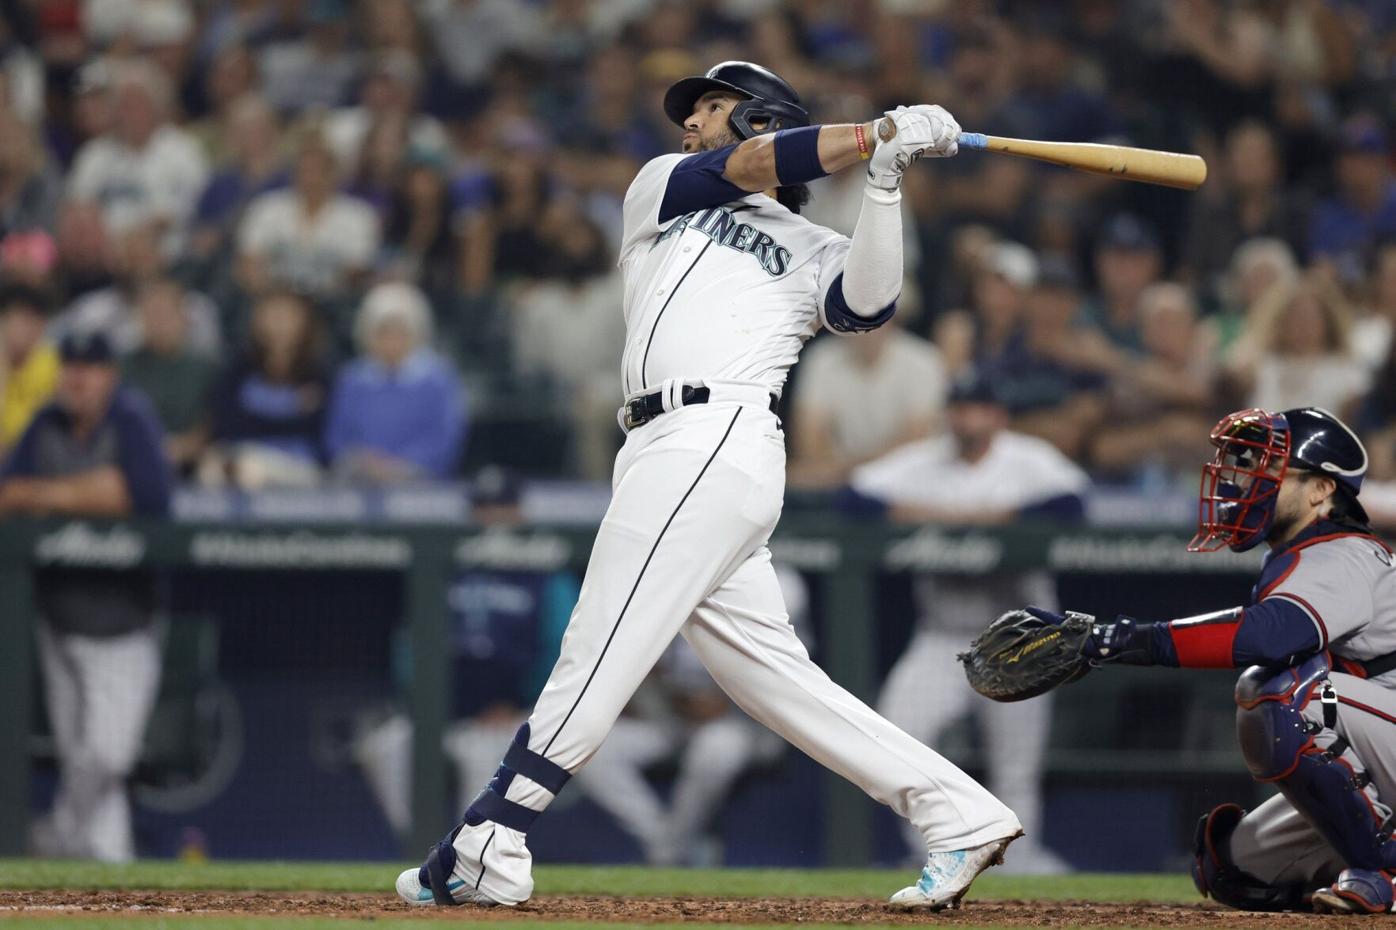 Eugenio Suarez's role in Mariners' 2022 success more than 'good